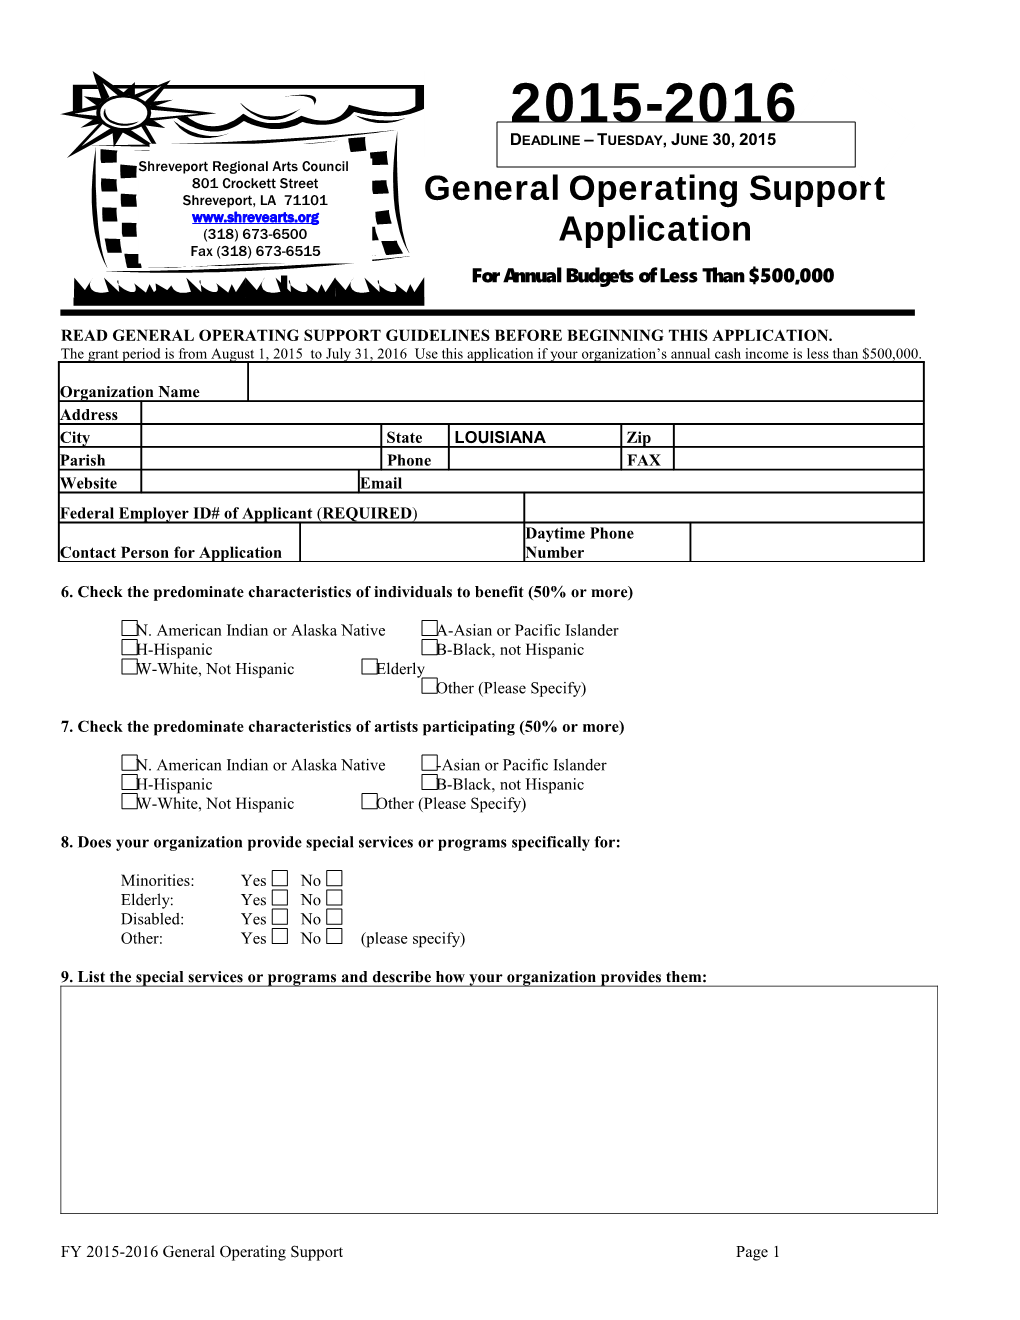 Read General Operating Support Guidelines Before Beginning This Application